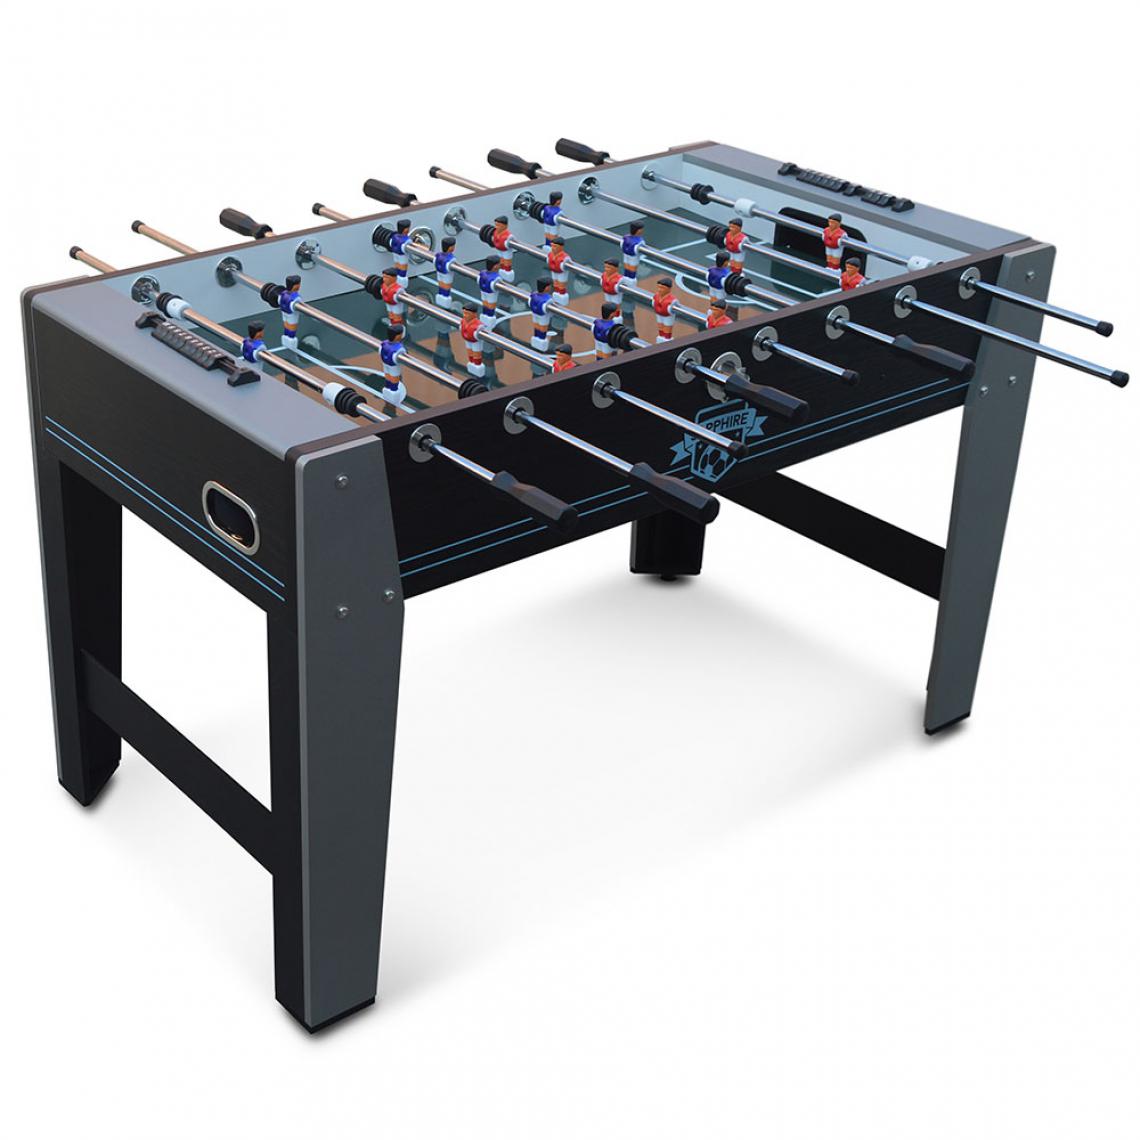 Devessport - Saphire Table football with Players Closed Legs - Large Size - Metal Bars - Plastic Handle - Has Markers - Devessport - Baby foot